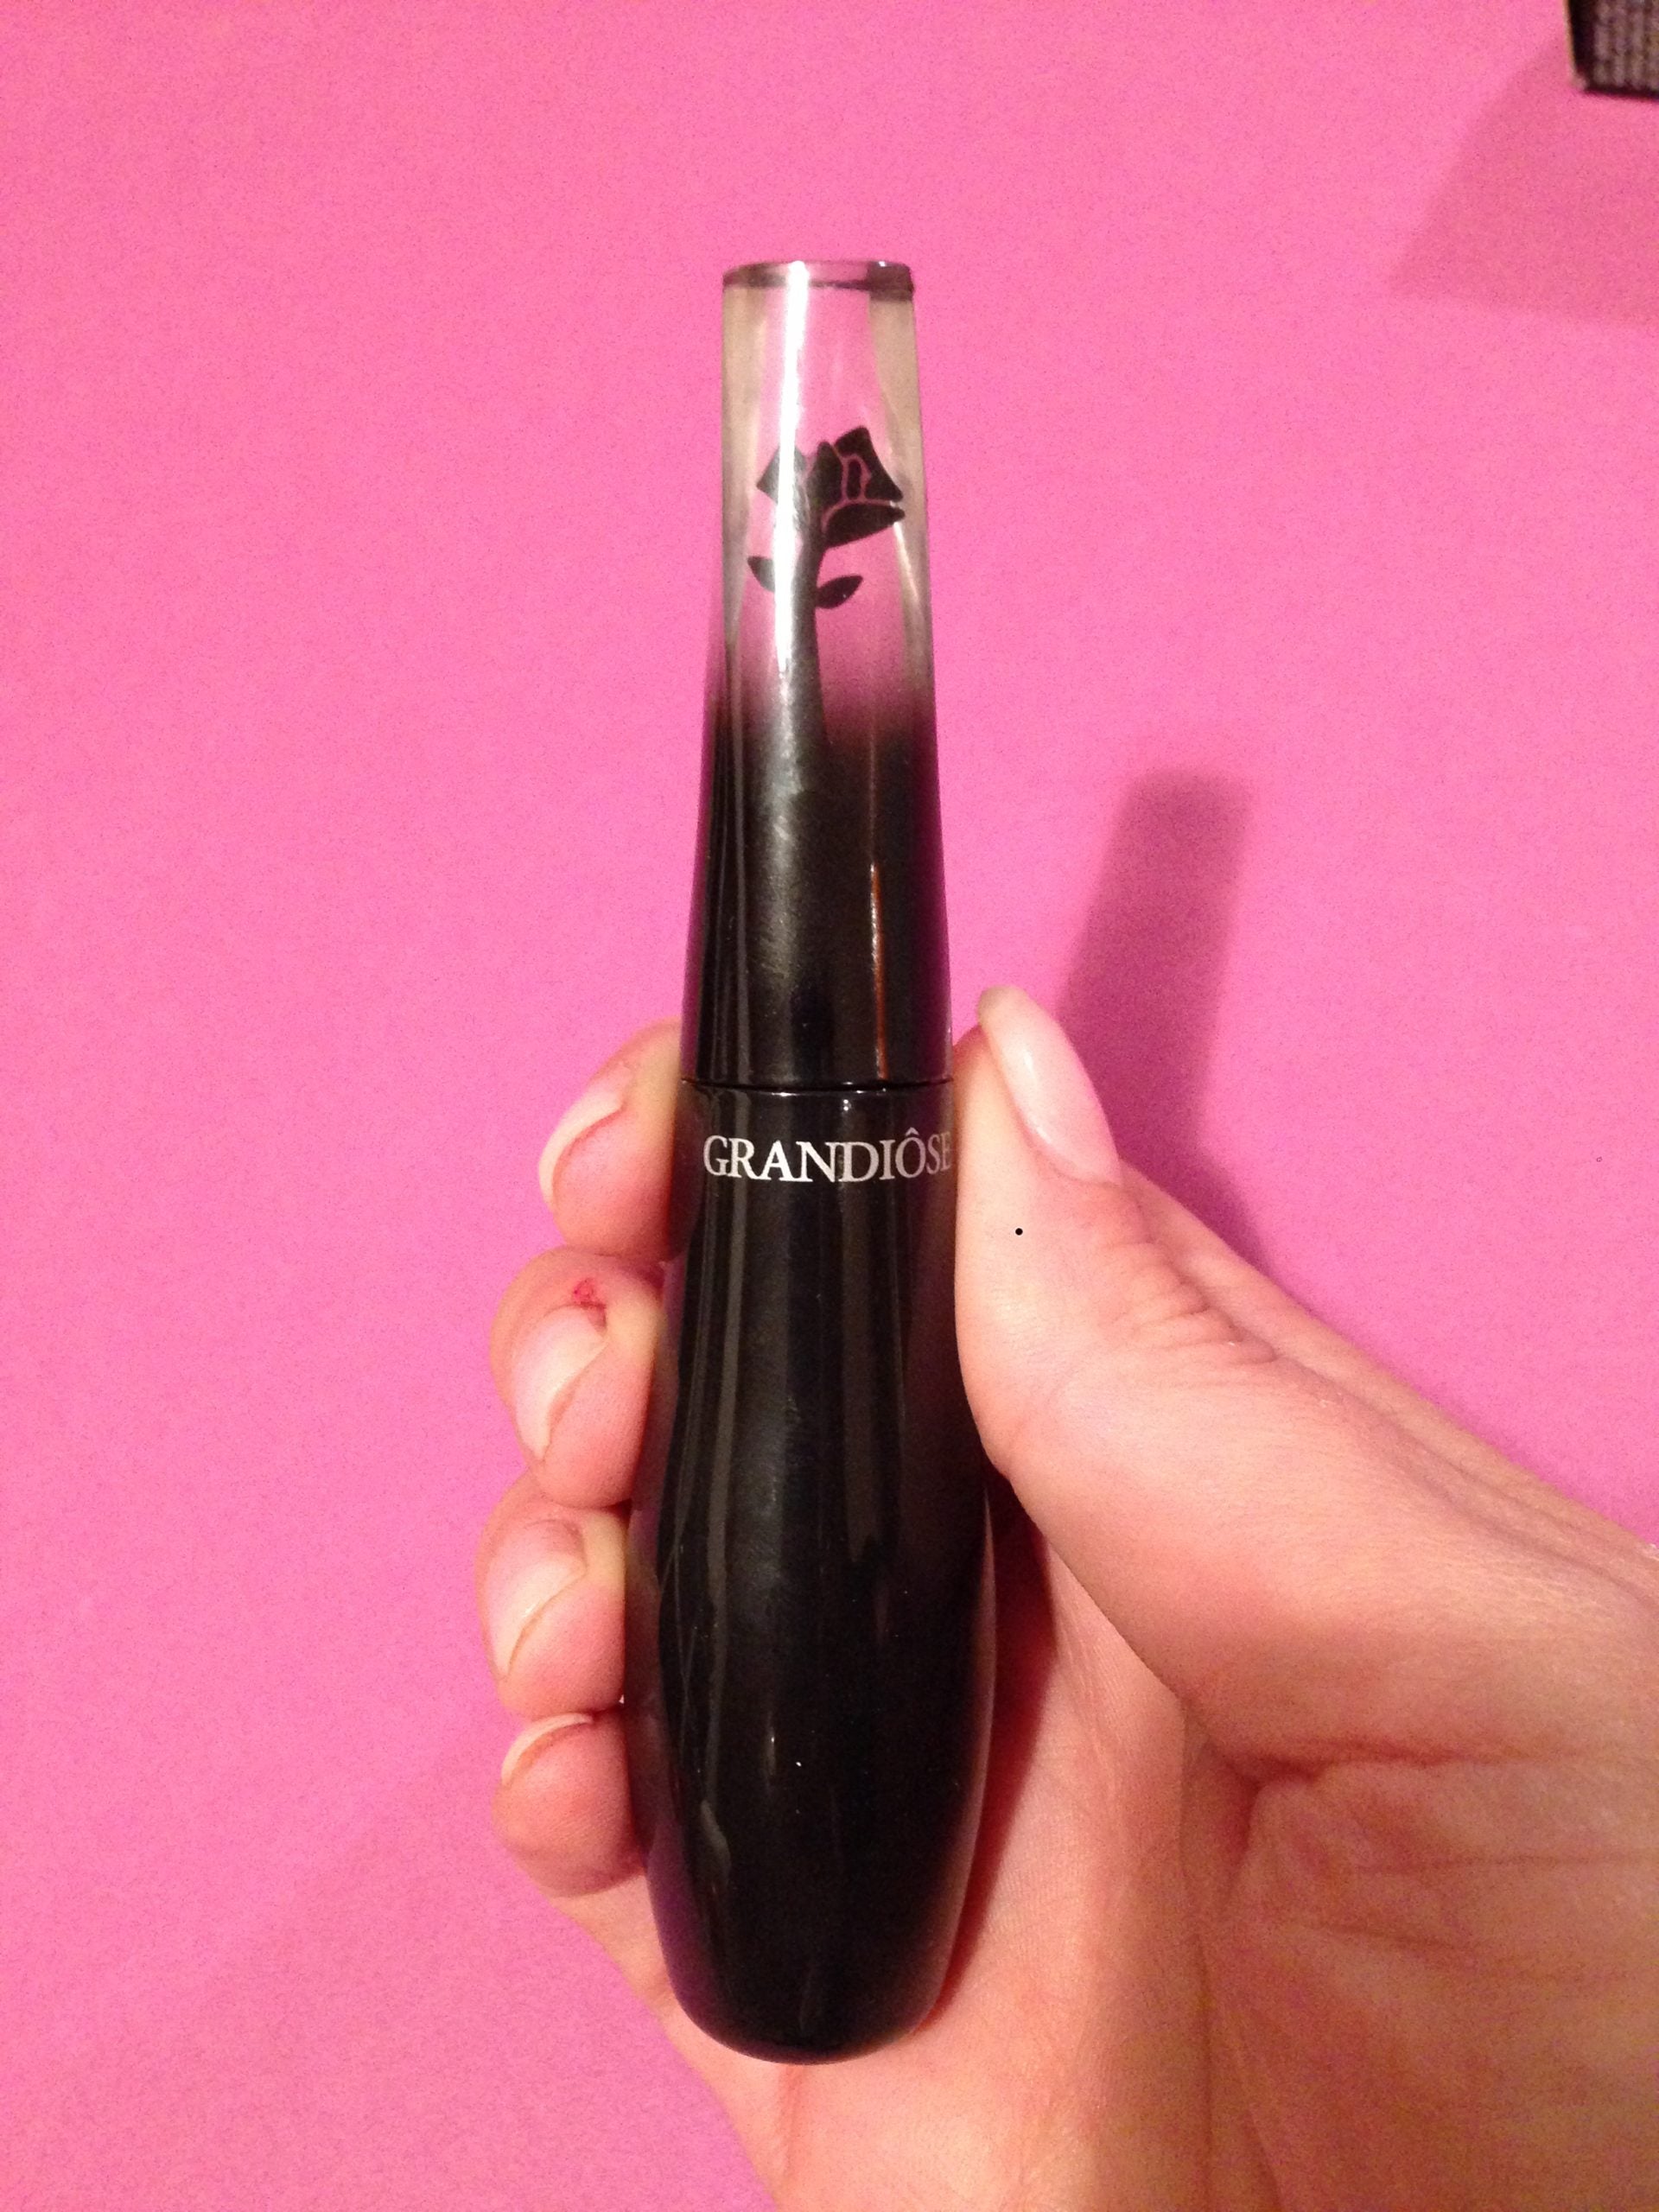 Before, After, Photos, Mascara Comparison, Review: Lancôme Grandiose Wide, Angle, Fan, Effect, Mascara, First, Of, Its, Kind, Wand, Provides, Bigger, Brighter, Eyes